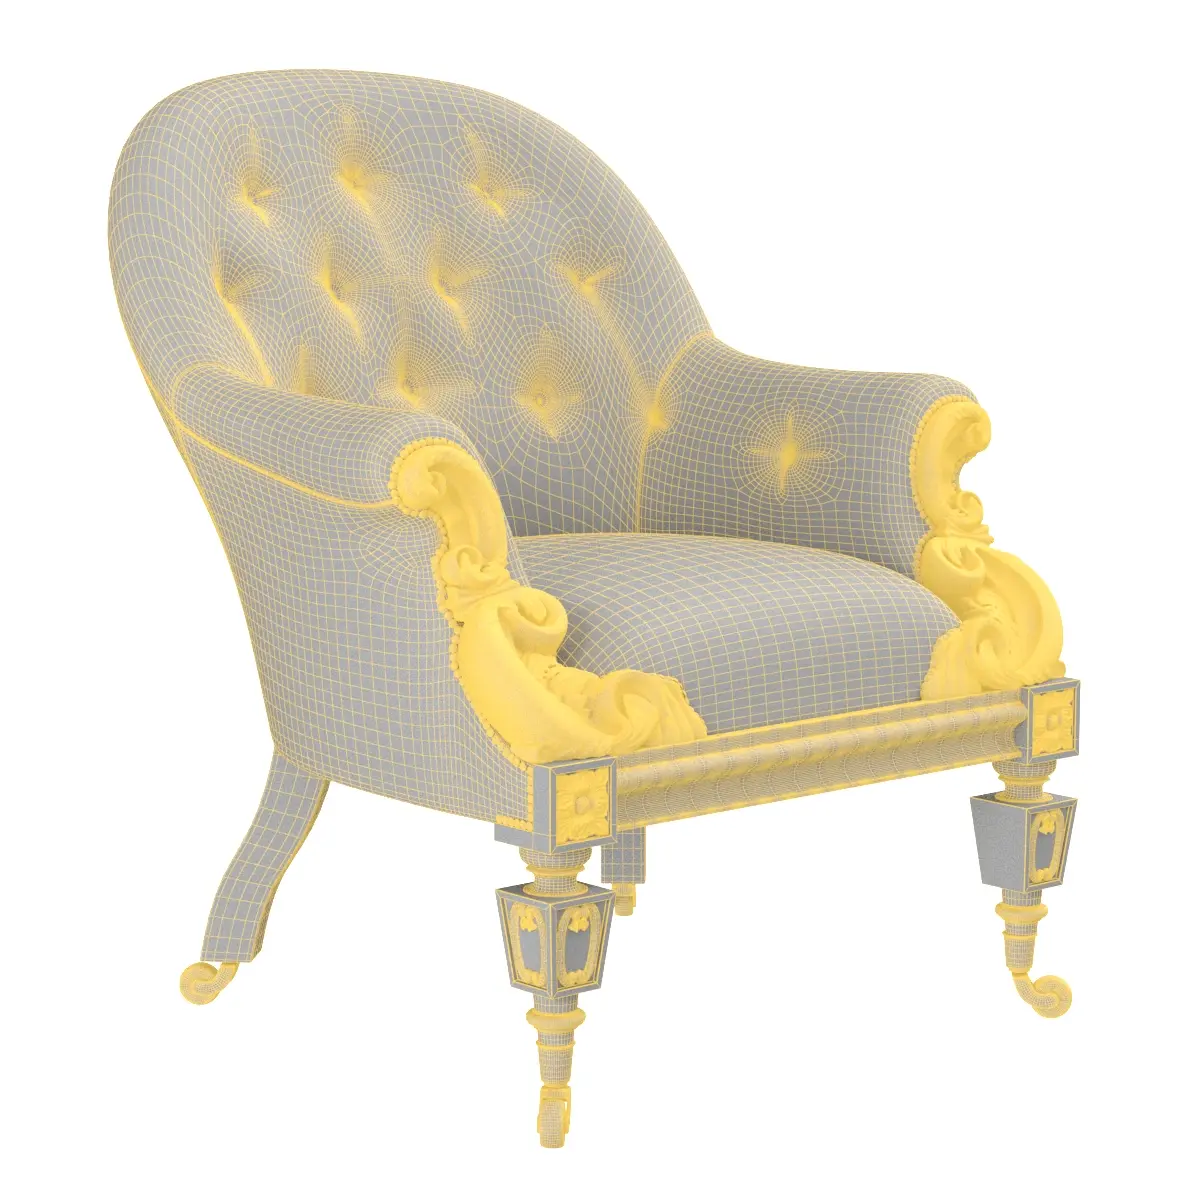 Early Victorian Rosewood Armchair 3D Model_07